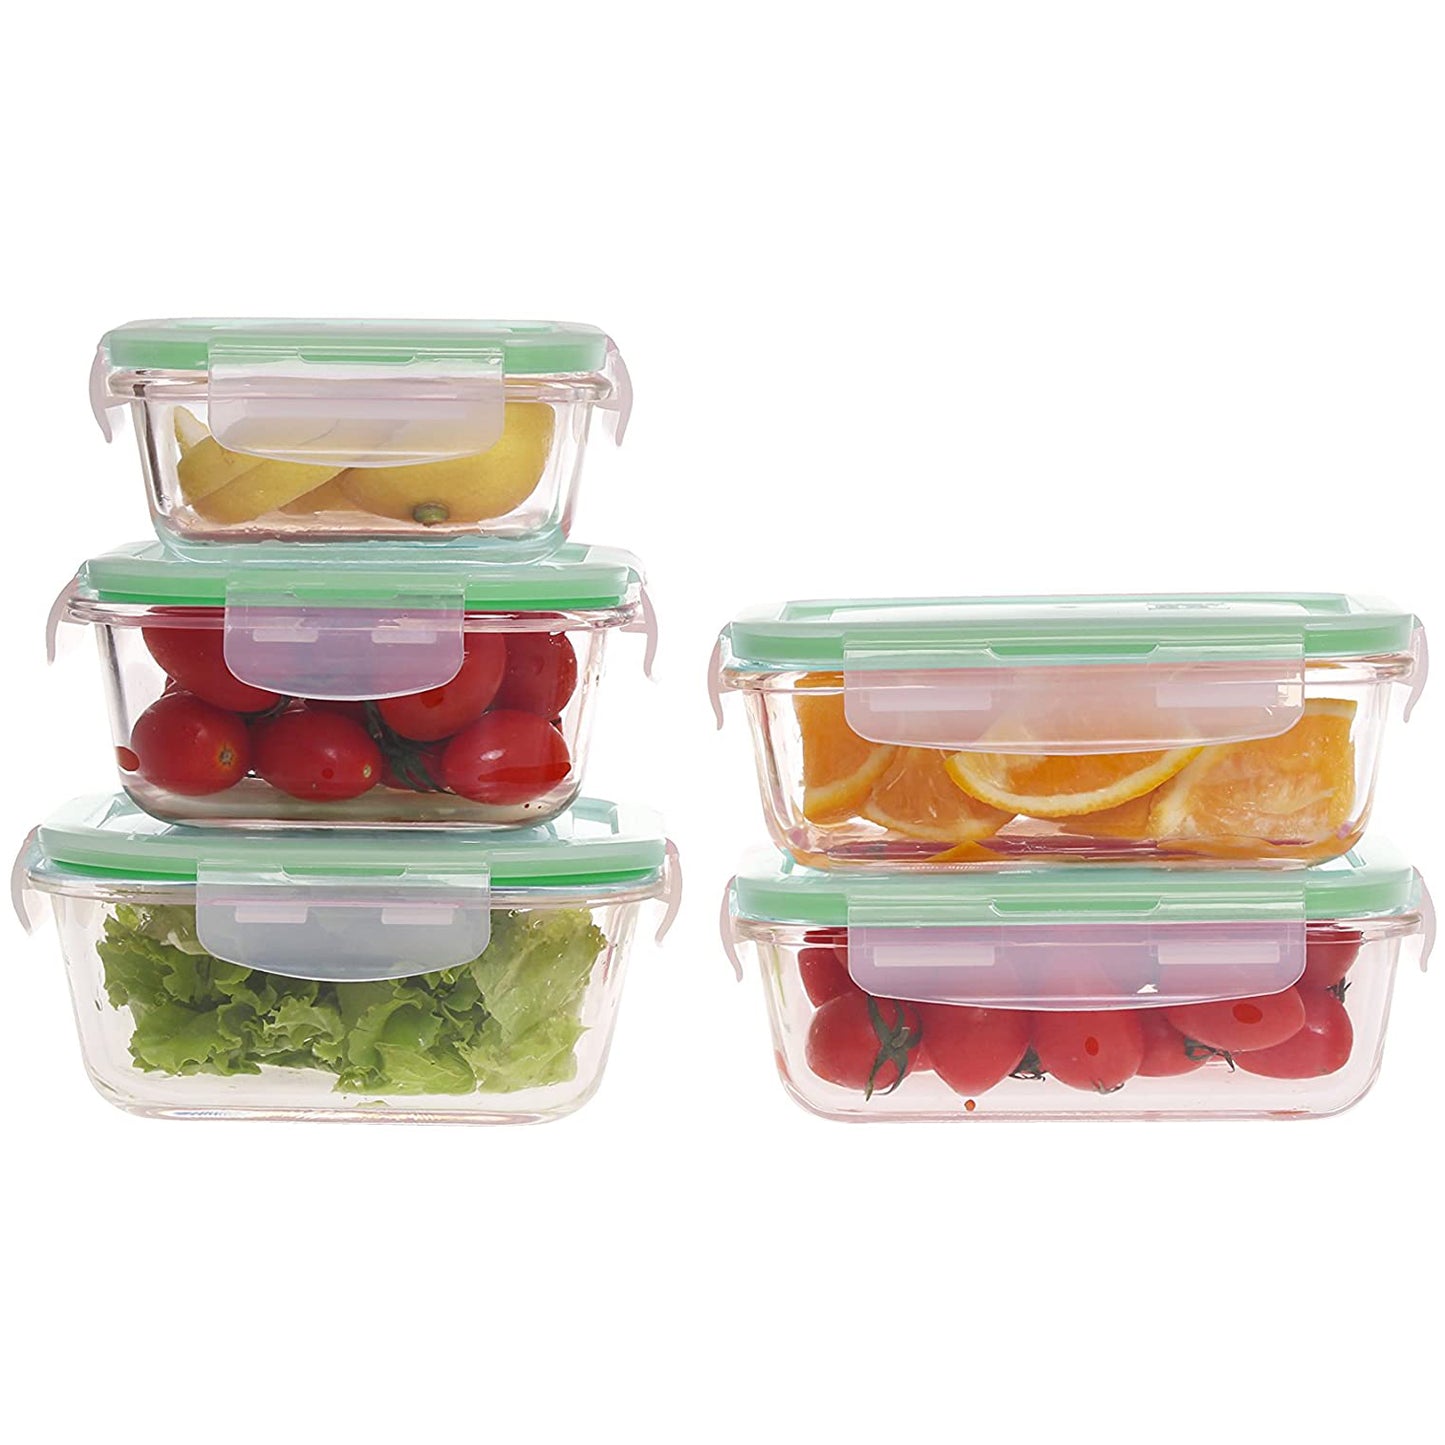 Farberware Microwave & Oven Safe Glass Container Food Storage Set with Locking Lids (10 Piece) Clear/Green